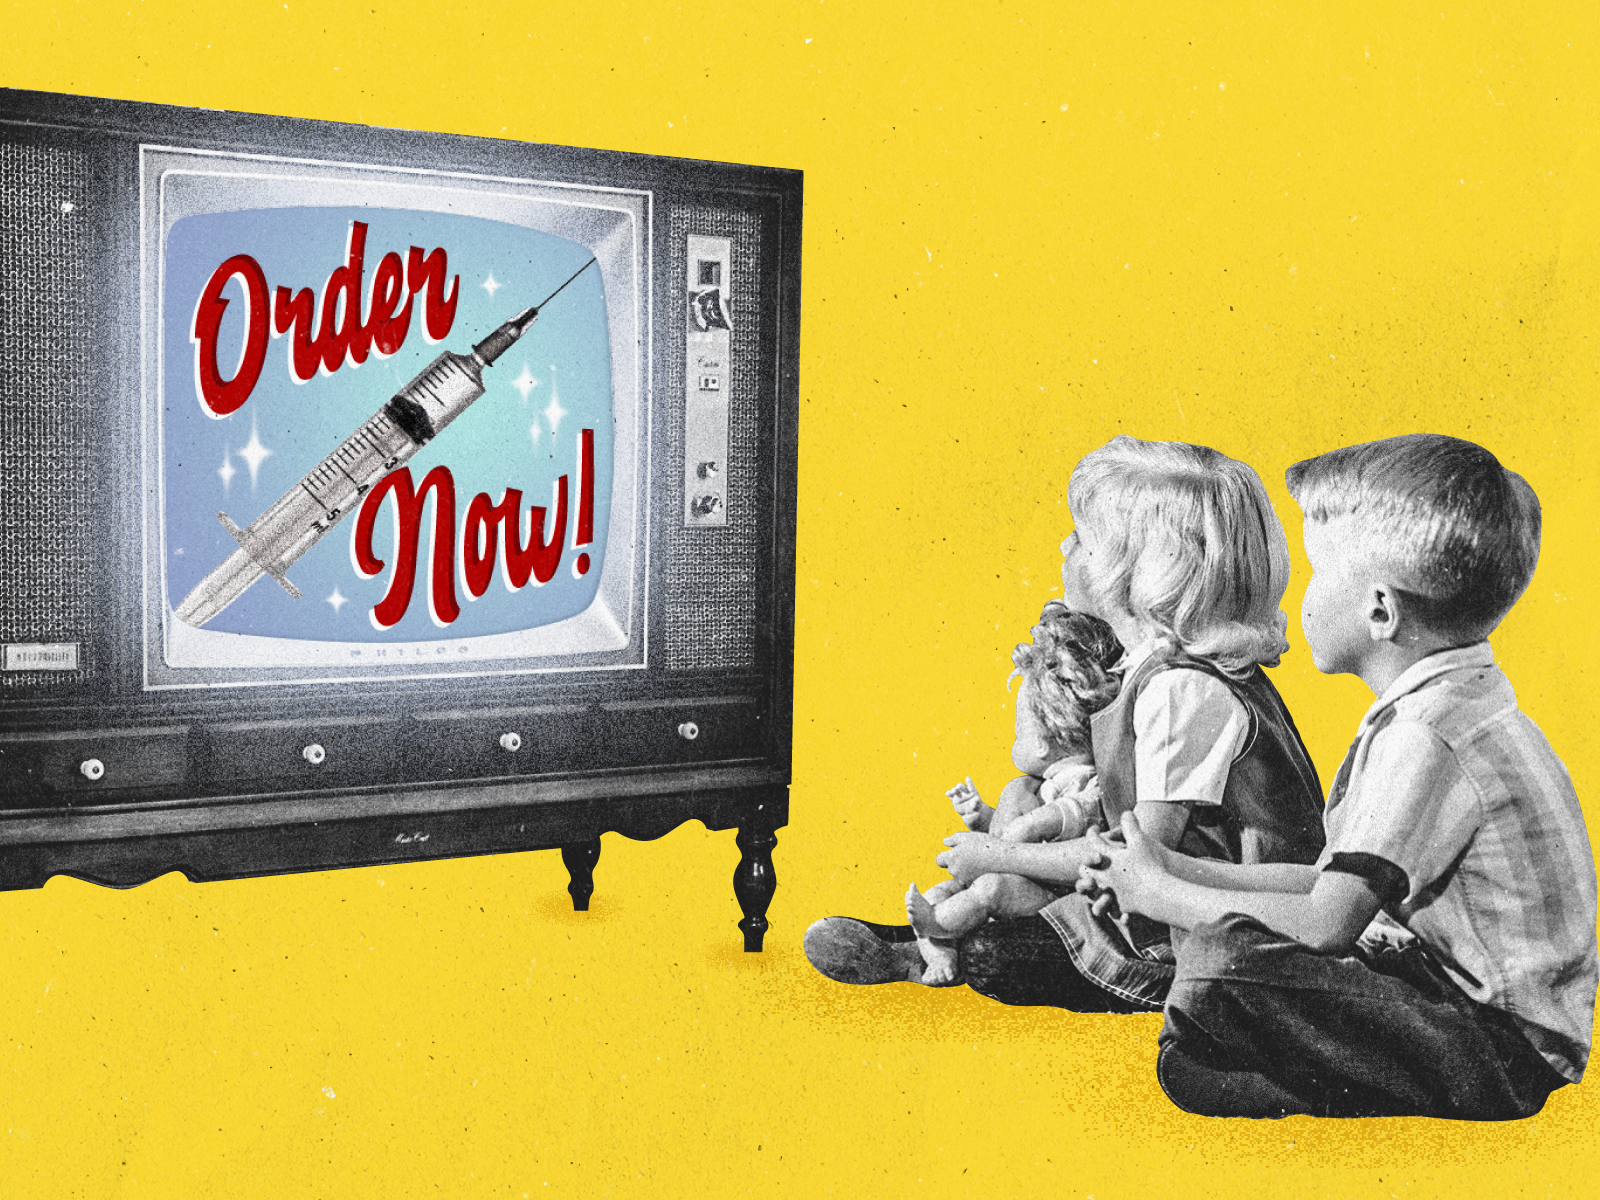 Black and white retro photo of kids watching a colorful advertisement on TV of a syringe with the words, "Order Now!" on a yellow background